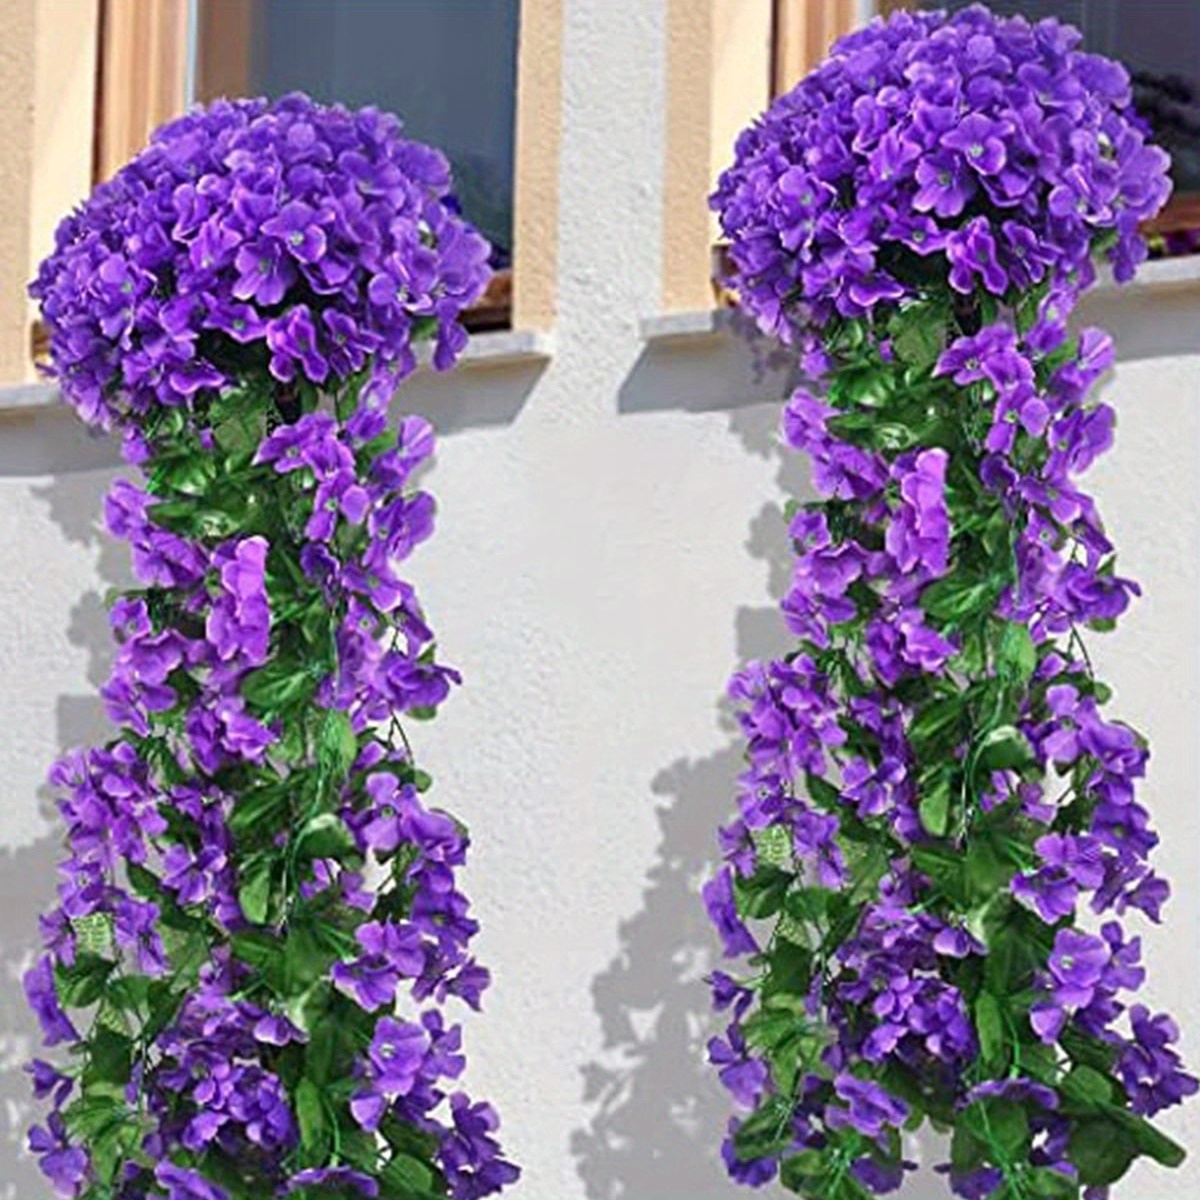 

2pcs 31.49 Inches Violet Ivy Flowers Lifelike Hanging Plant Artificial Hanging Flowers Decorations For Outdoor Home Wedding Garden Yard Hanging Baskets Wisteria Garland Decoration